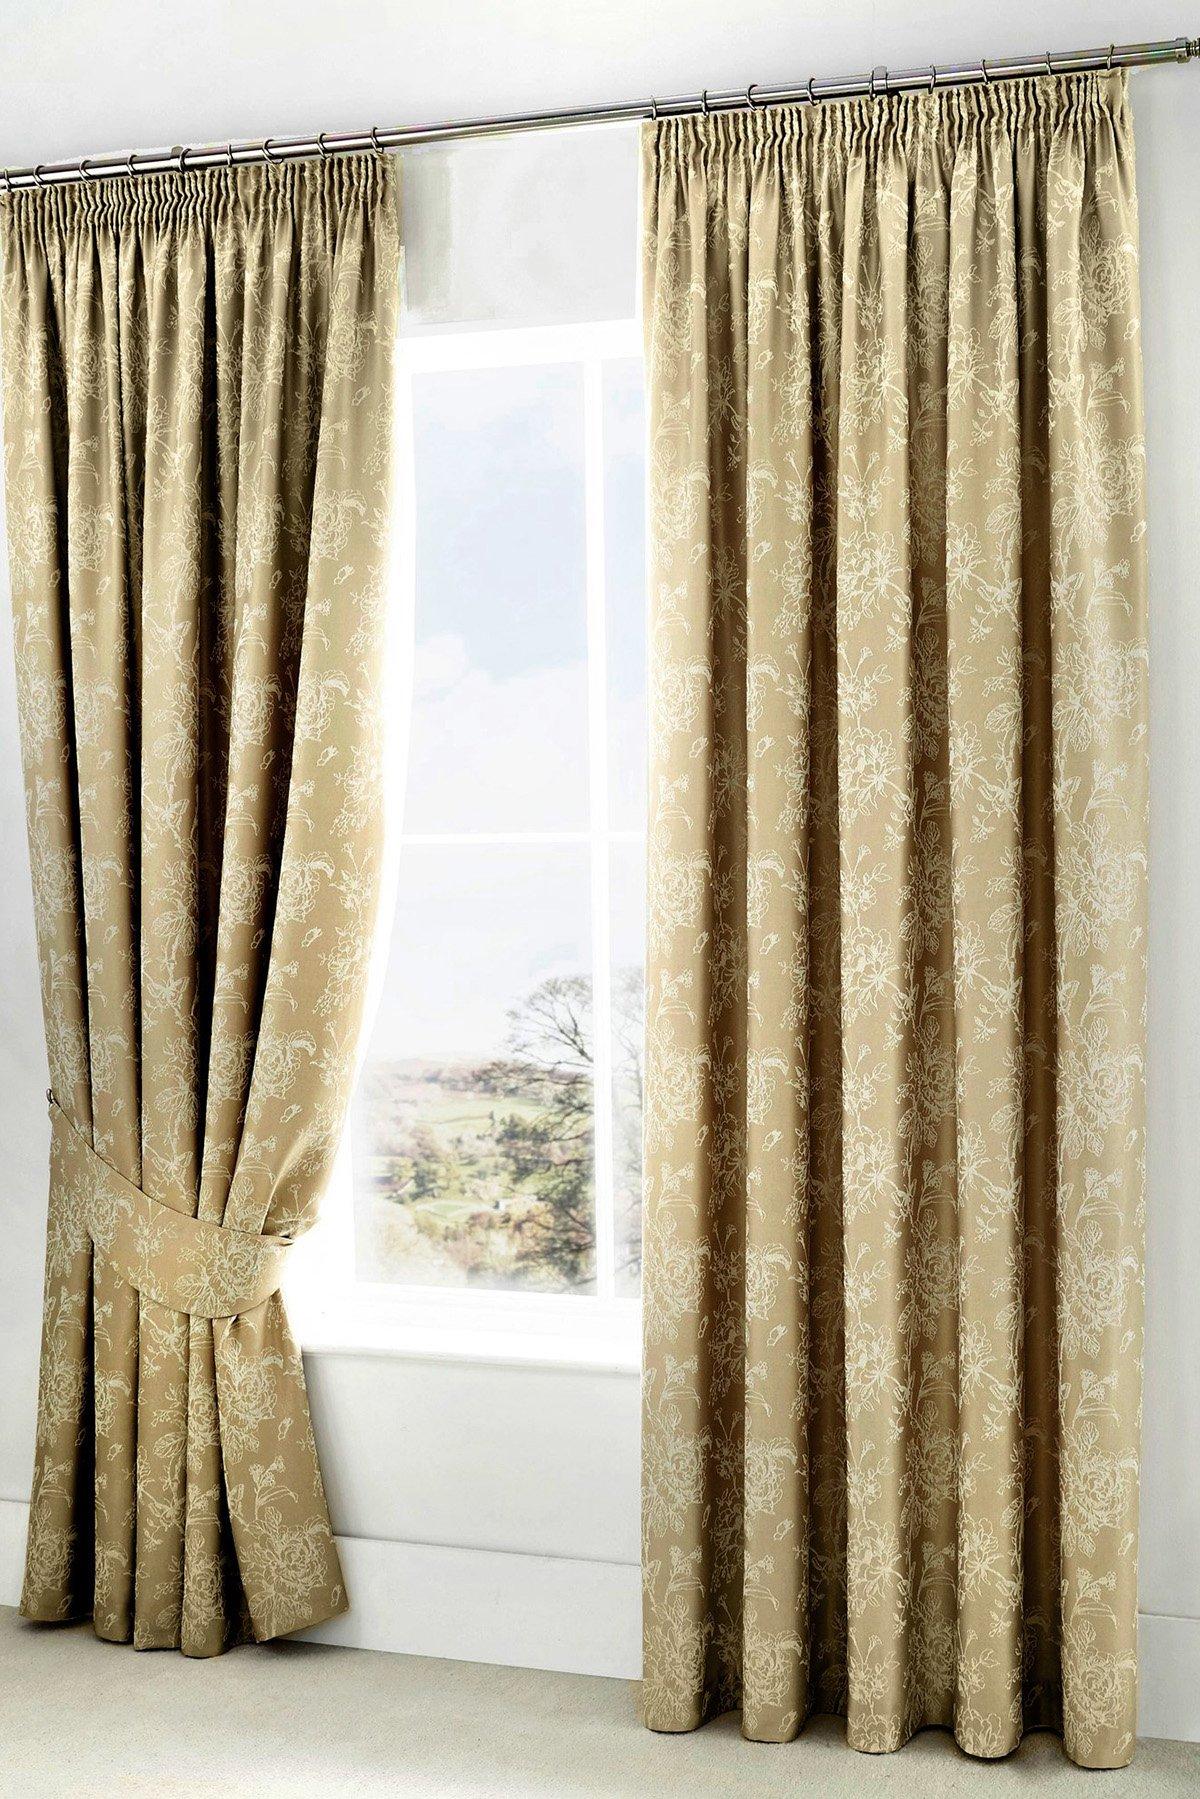 'Jasmine' Floral Jacquard Weave Pair of Lined Pencil Curtains with Tie-backs